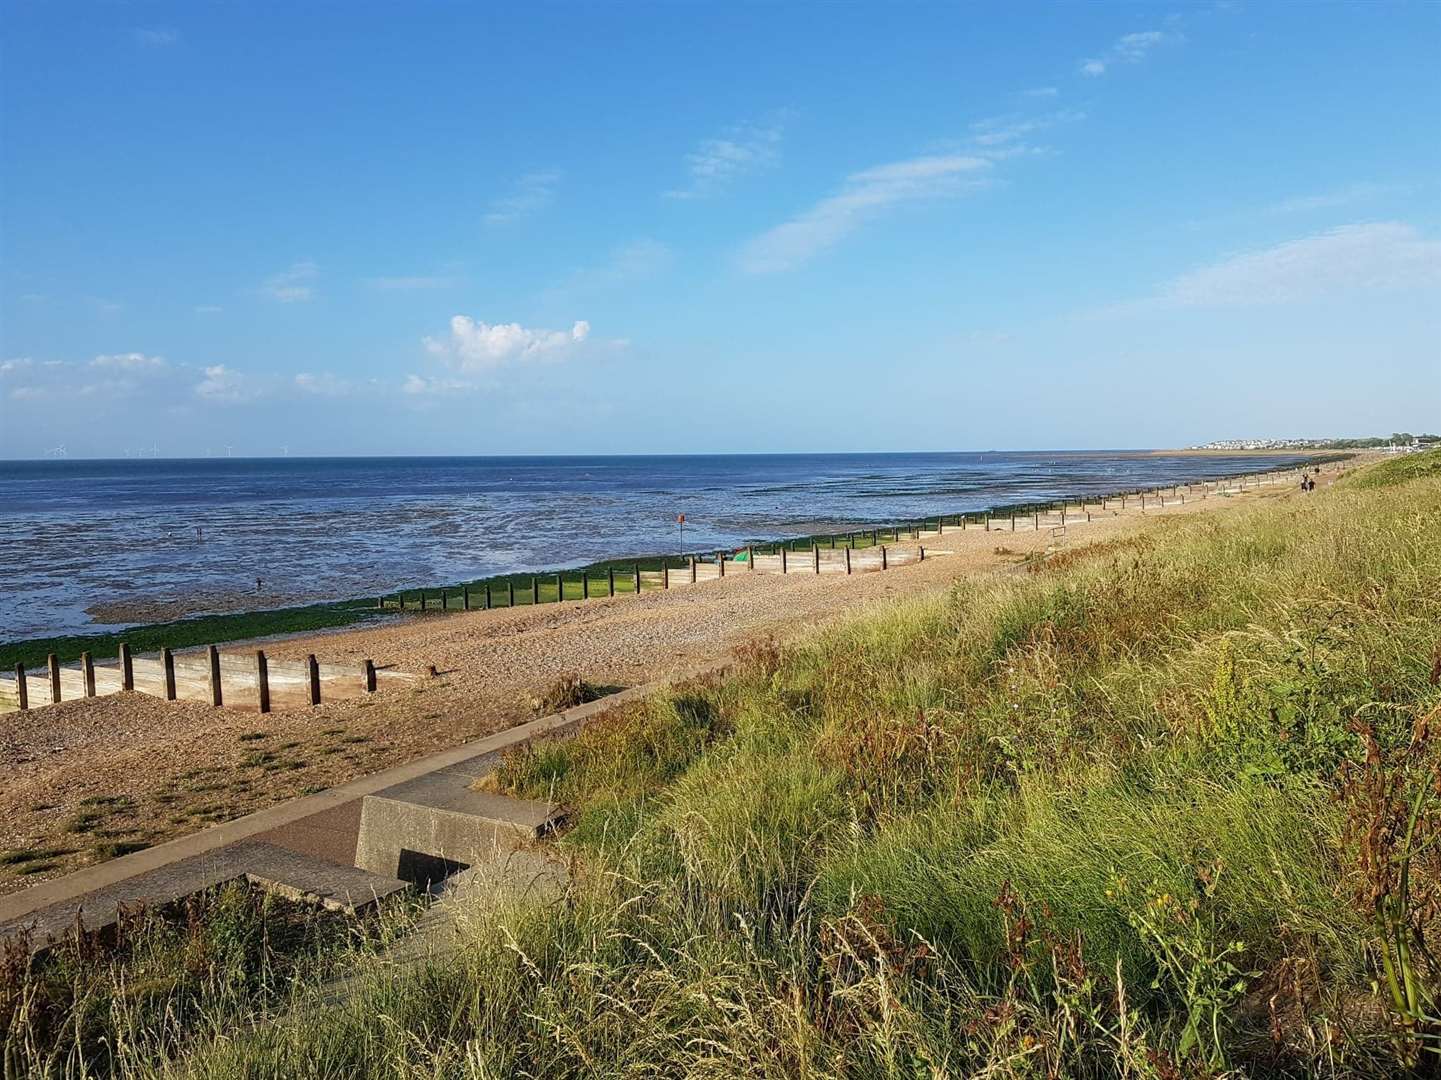 People are being advised not to enter the water between Herne Bay and Whitstable